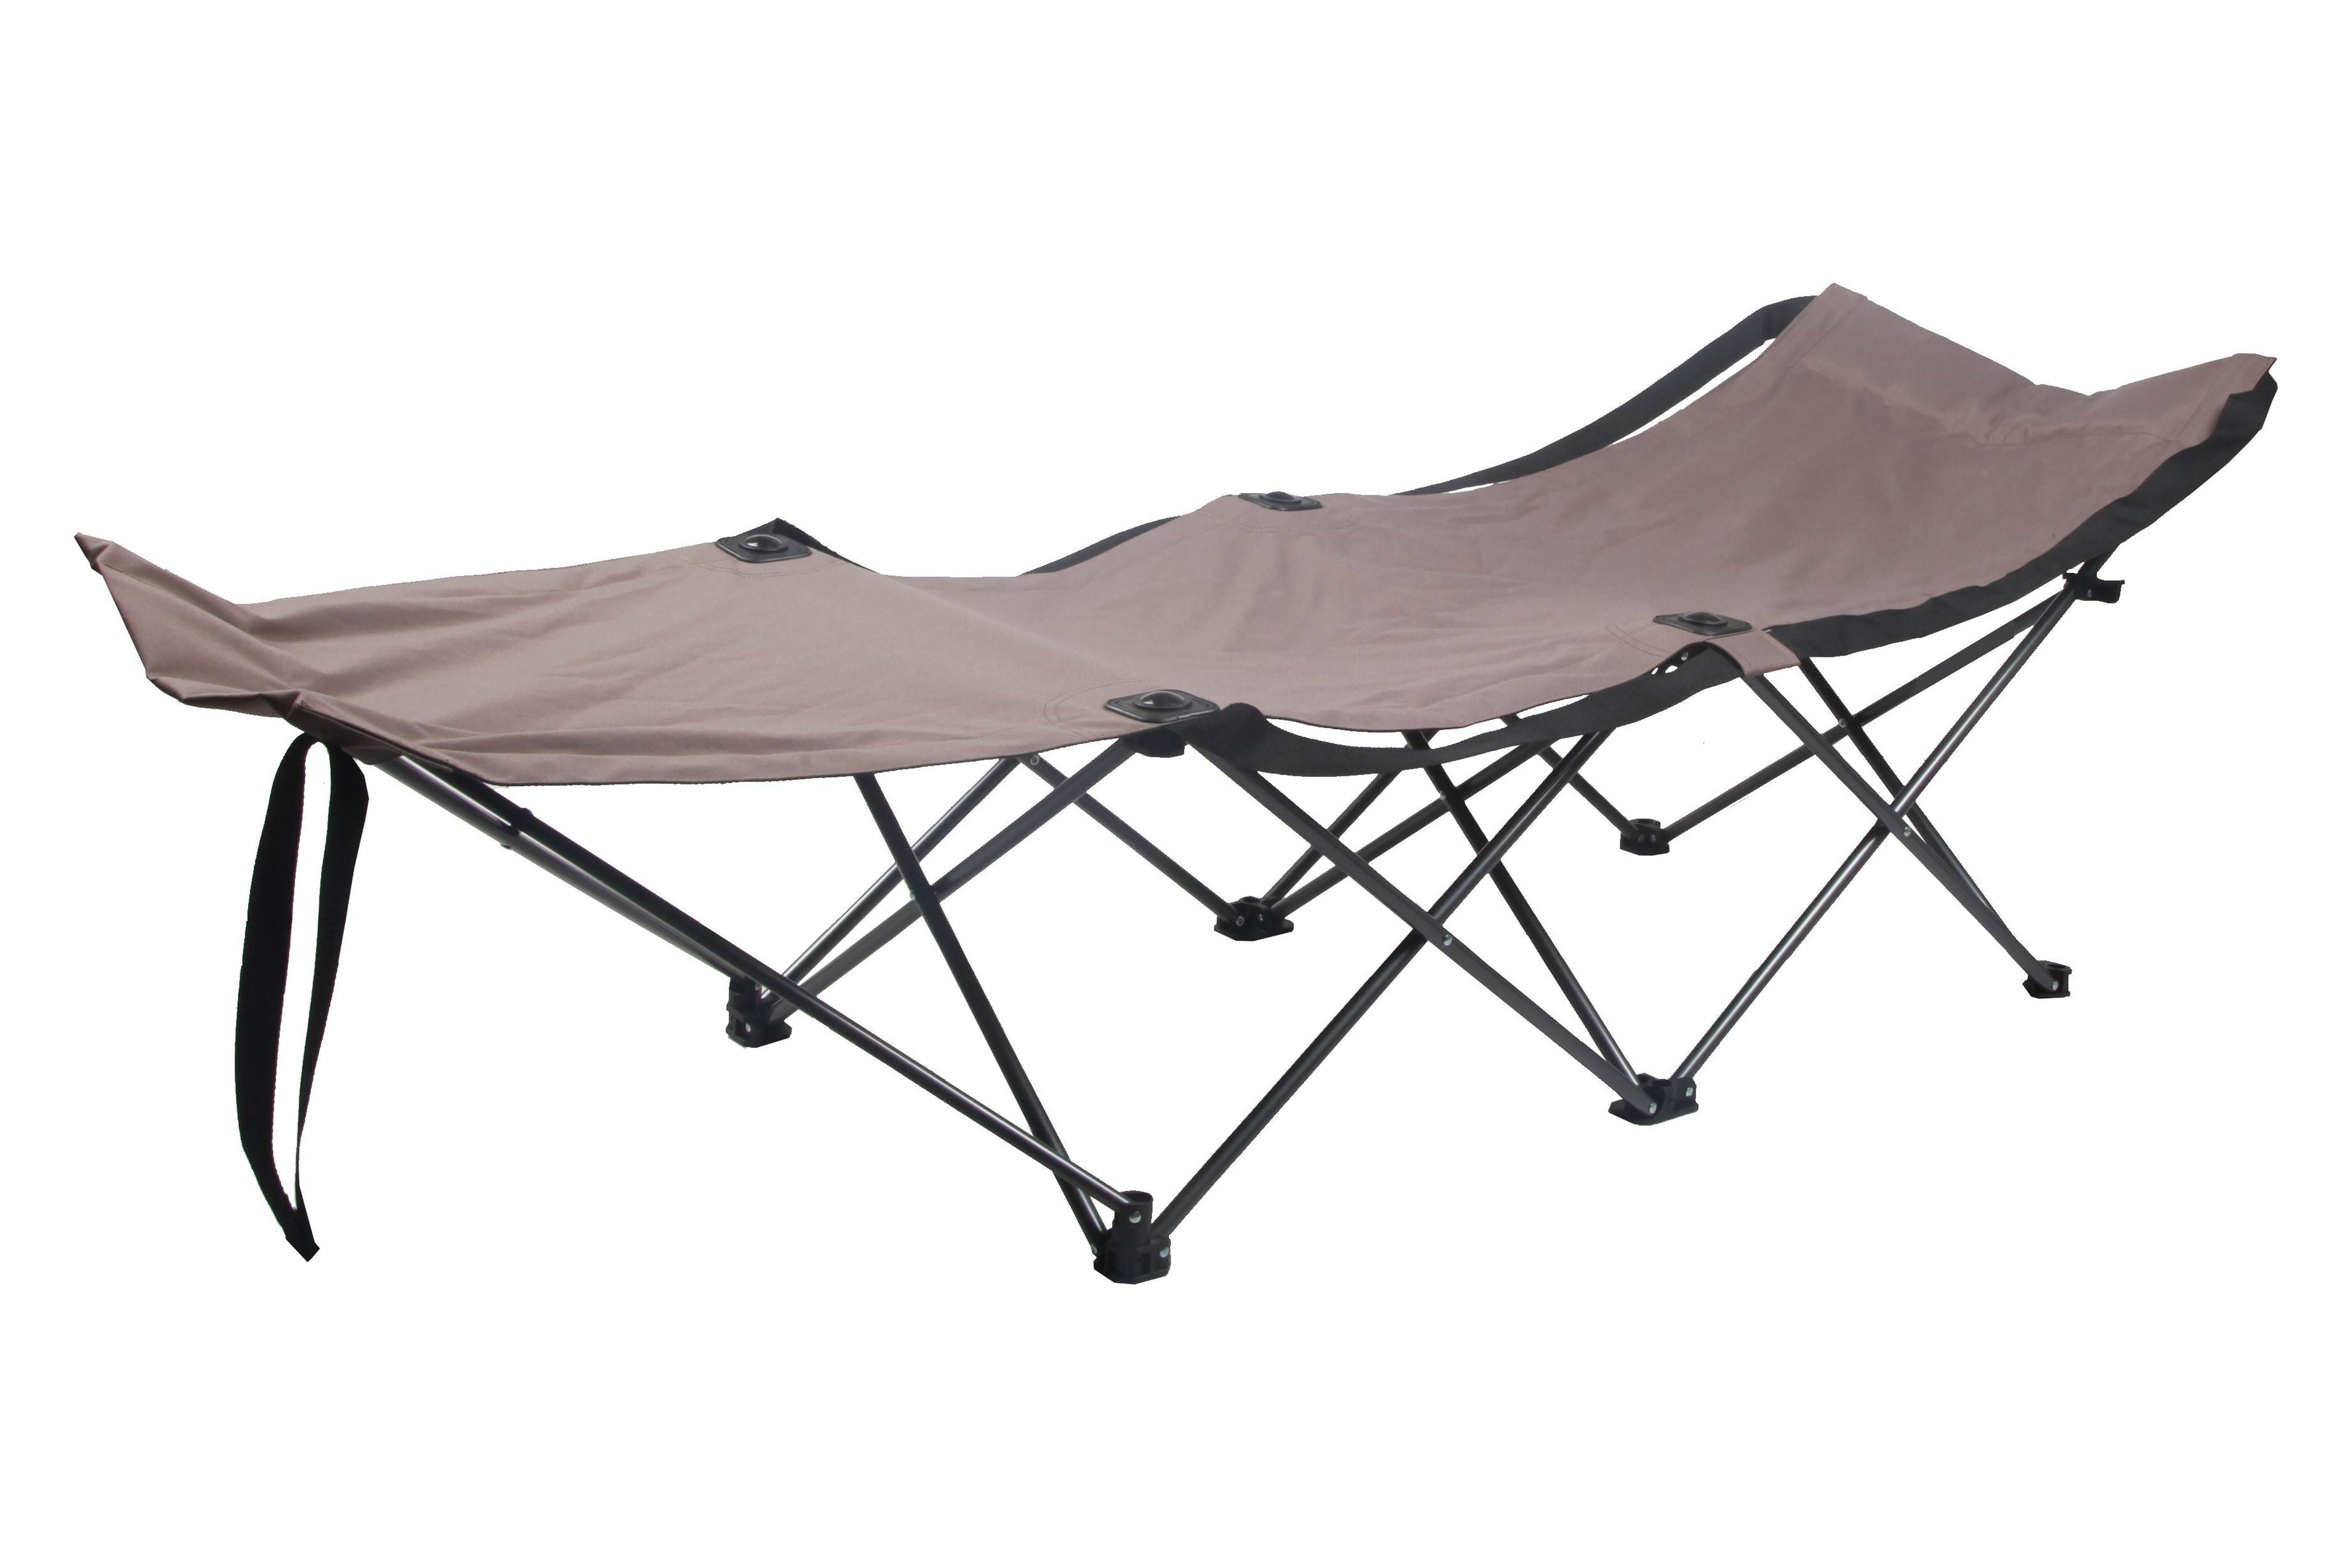 Durable Collapsible Camp Cot for Outdoor Sleep | Image